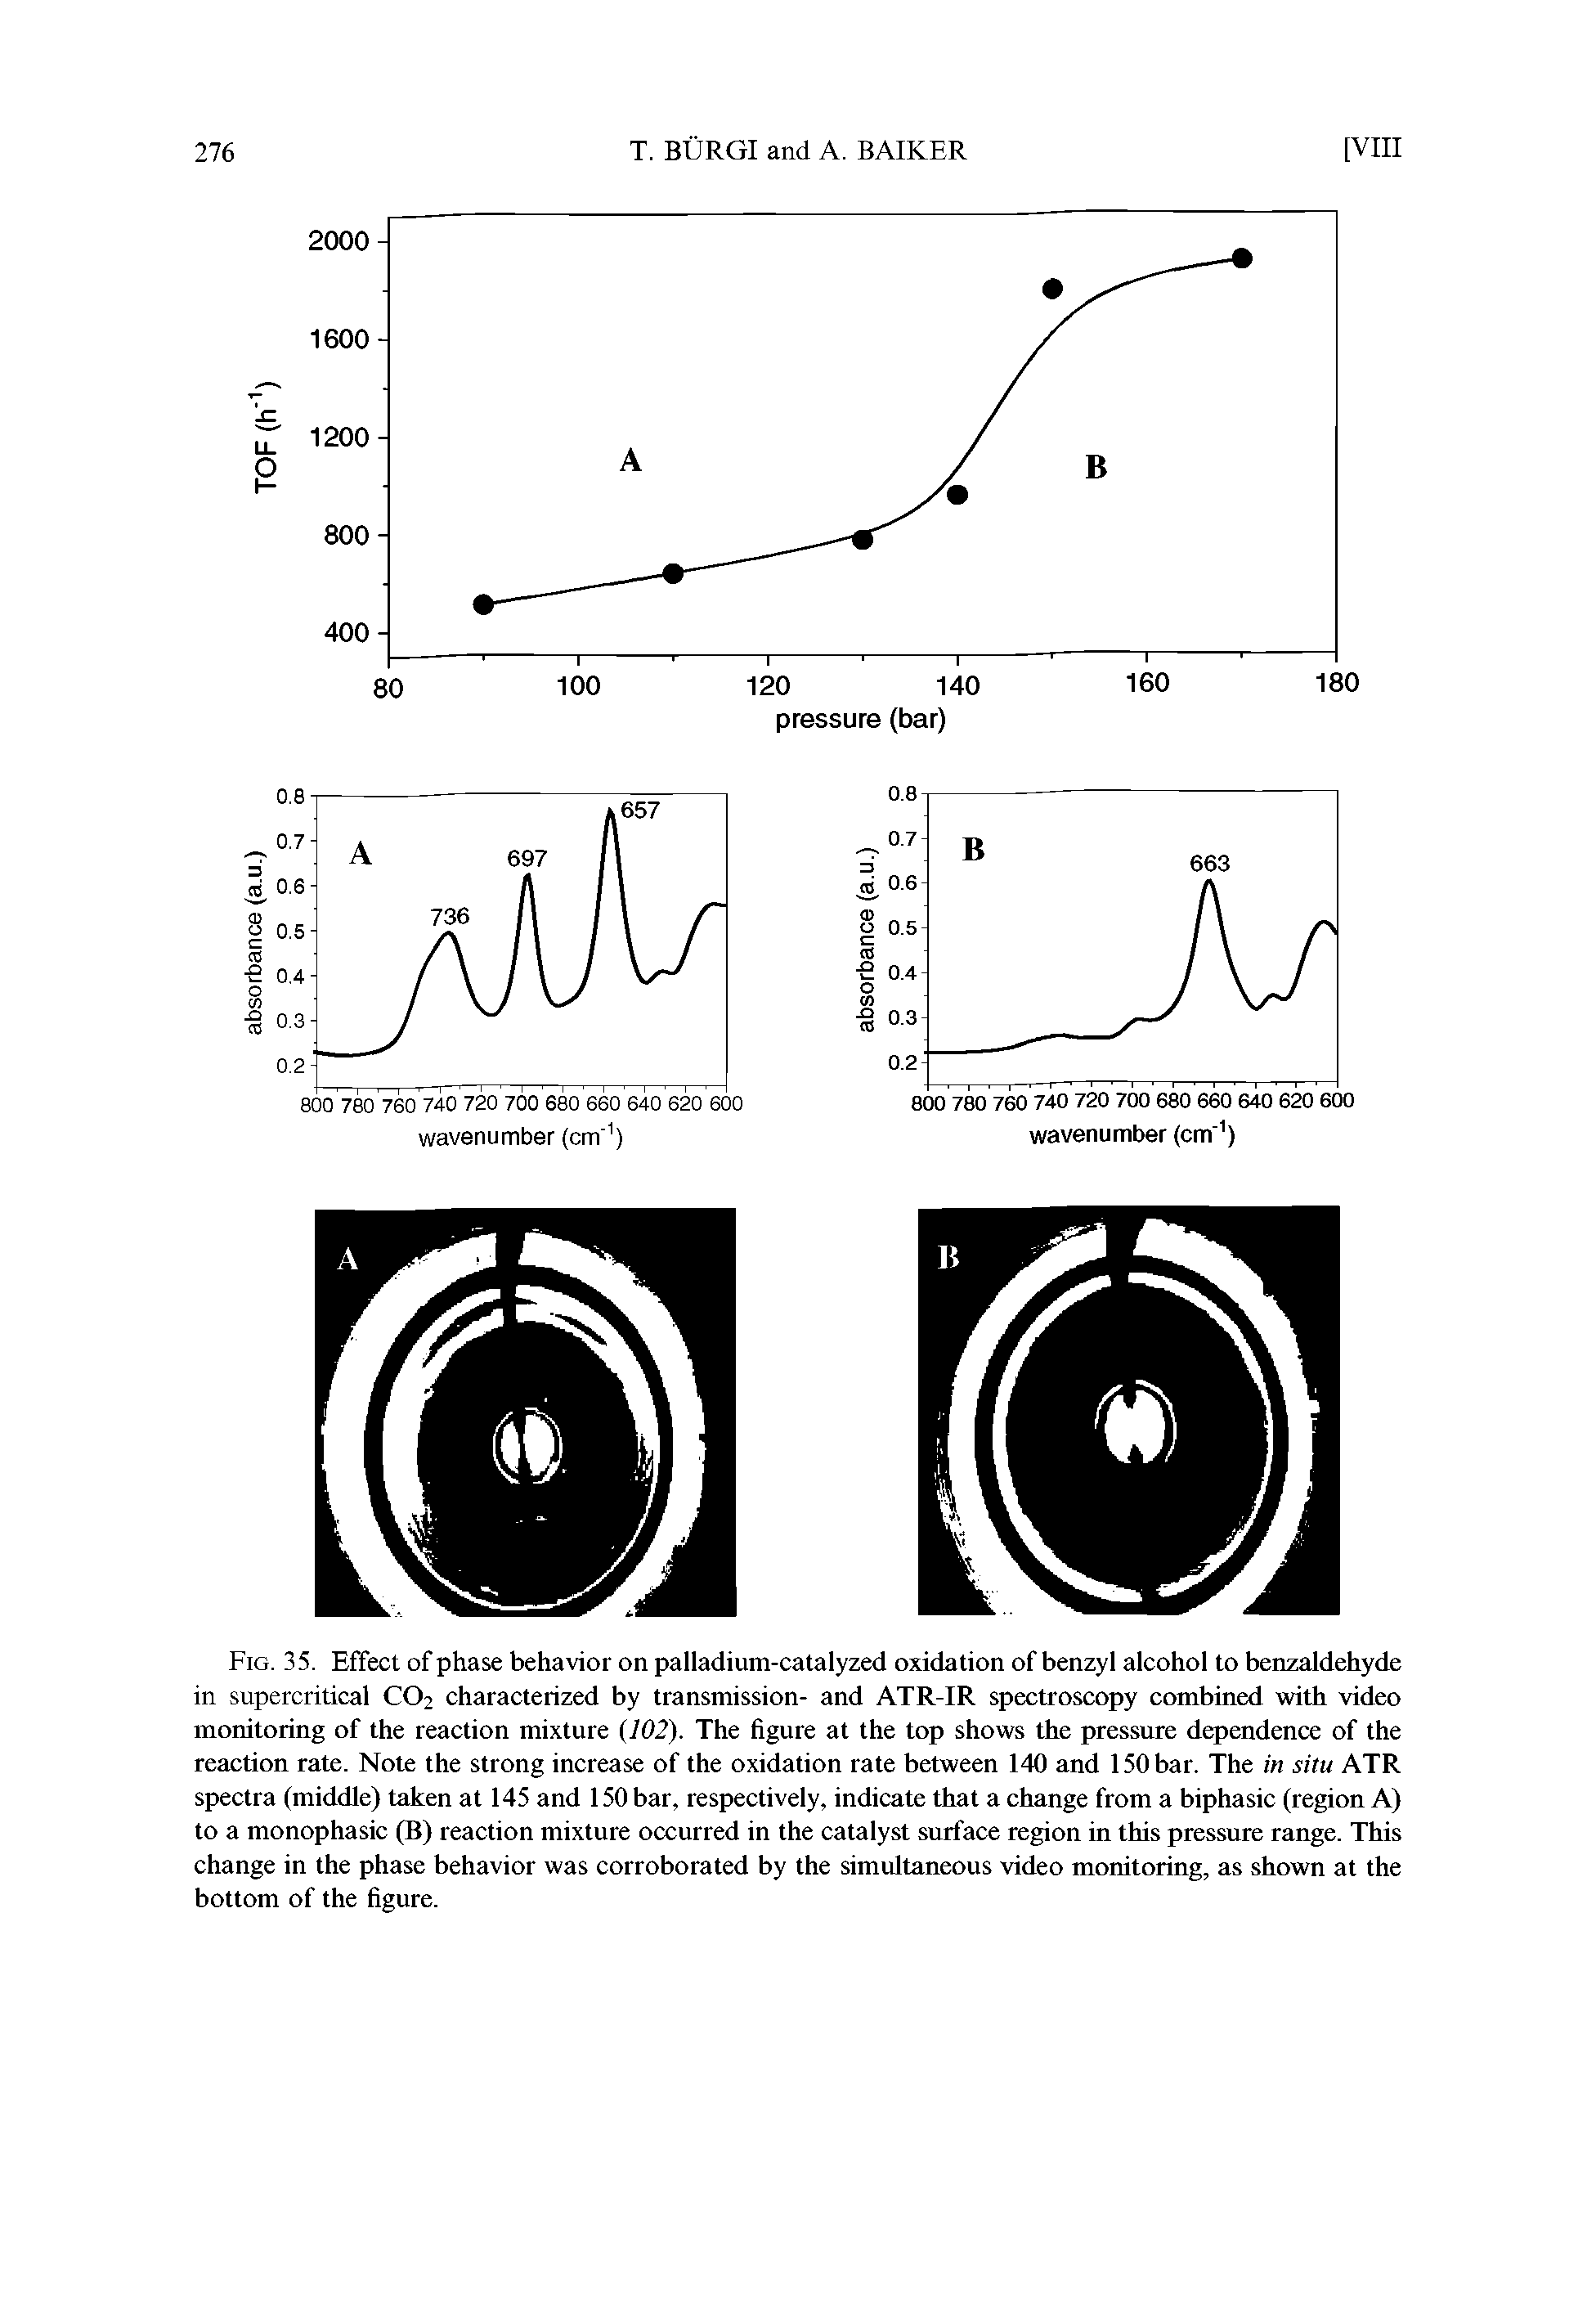 Fig. 35. Effect of phase behavior on palladium-catalyzed oxidation of benzyl alcohol to benzaldehyde in supercritical CO2 characterized by transmission- and ATR-IR spectroscopy combined with video monitoring of the reaction mixture (102). The figure at the top shows the pressure dependence of the reaction rate. Note the strong increase of the oxidation rate between 140 and 150 bar. The in situ ATR spectra (middle) taken at 145 and 150 bar, respectively, indicate that a change from a biphasic (region A) to a monophasic (B) reaction mixture occurred in the catalyst surface region in this pressure range. This change in the phase behavior was corroborated by the simultaneous video monitoring, as shown at the bottom of the figure.